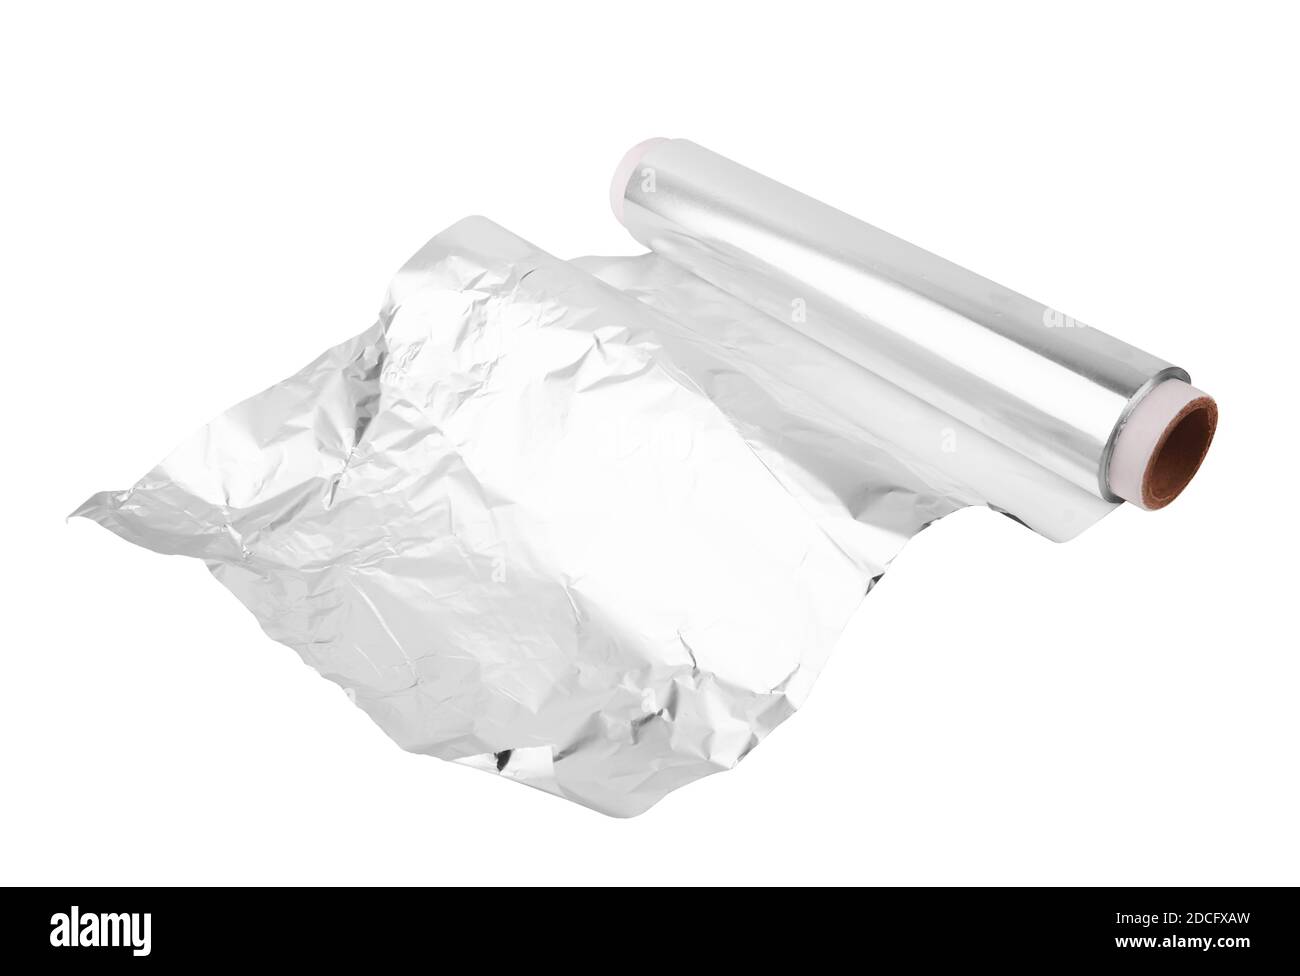 A roll of aluminum foil isolated on white background Stock Photo